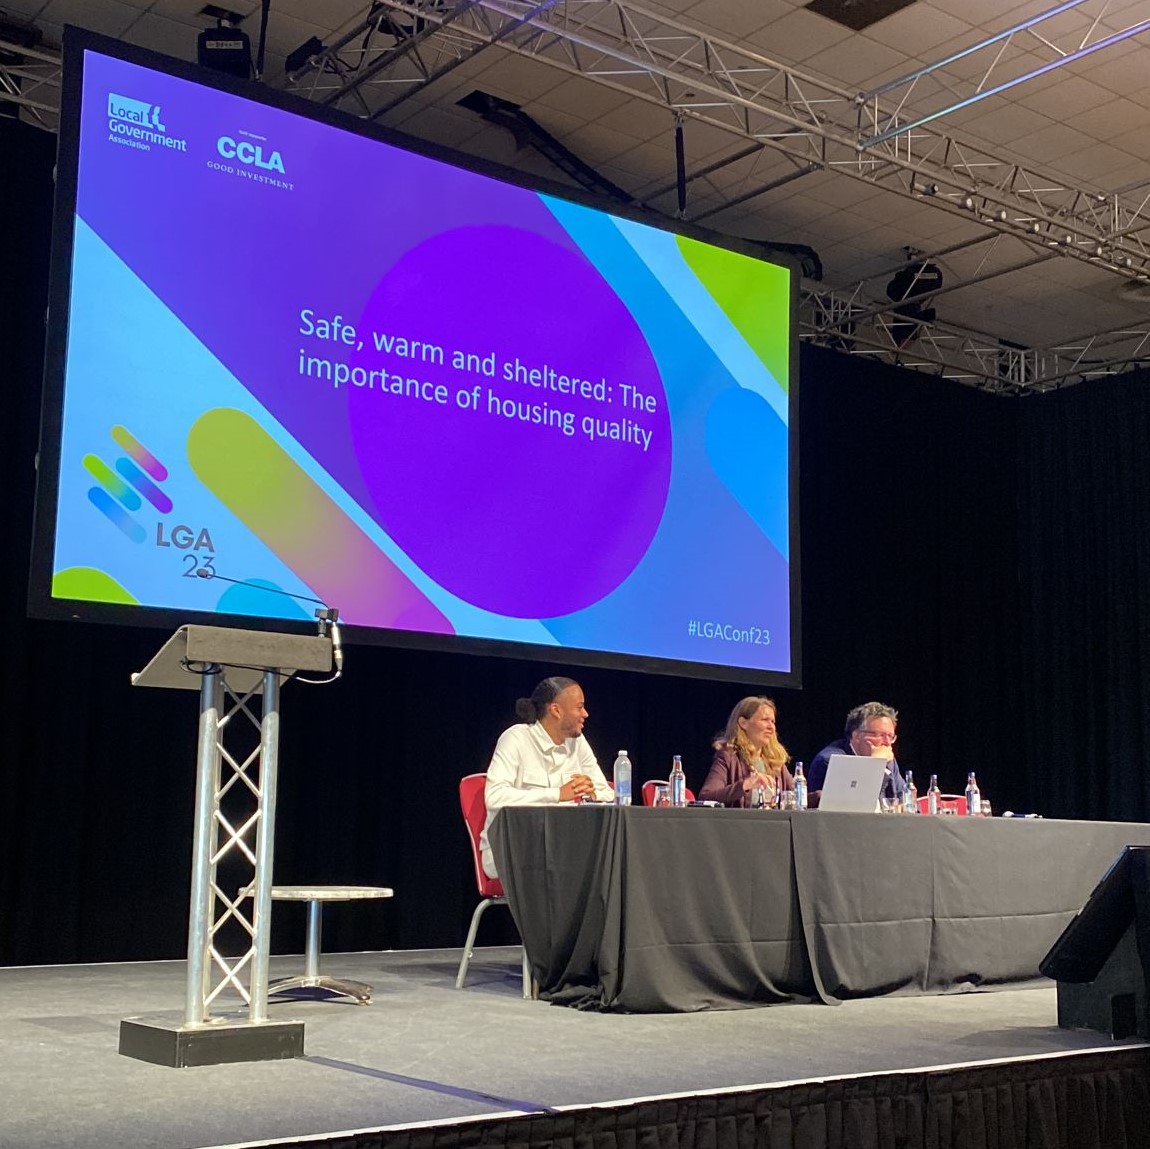 Earlier, Chair Cllr Vikki Slade @vikki4mdnp started our housing session ‘Safe, warm and sheltered: The importance of housing quality’ at the #LGAConf23 off by saying:

“We’re facing huge challenges in terms of affordability, availability, security and quality of housing”. 1/4